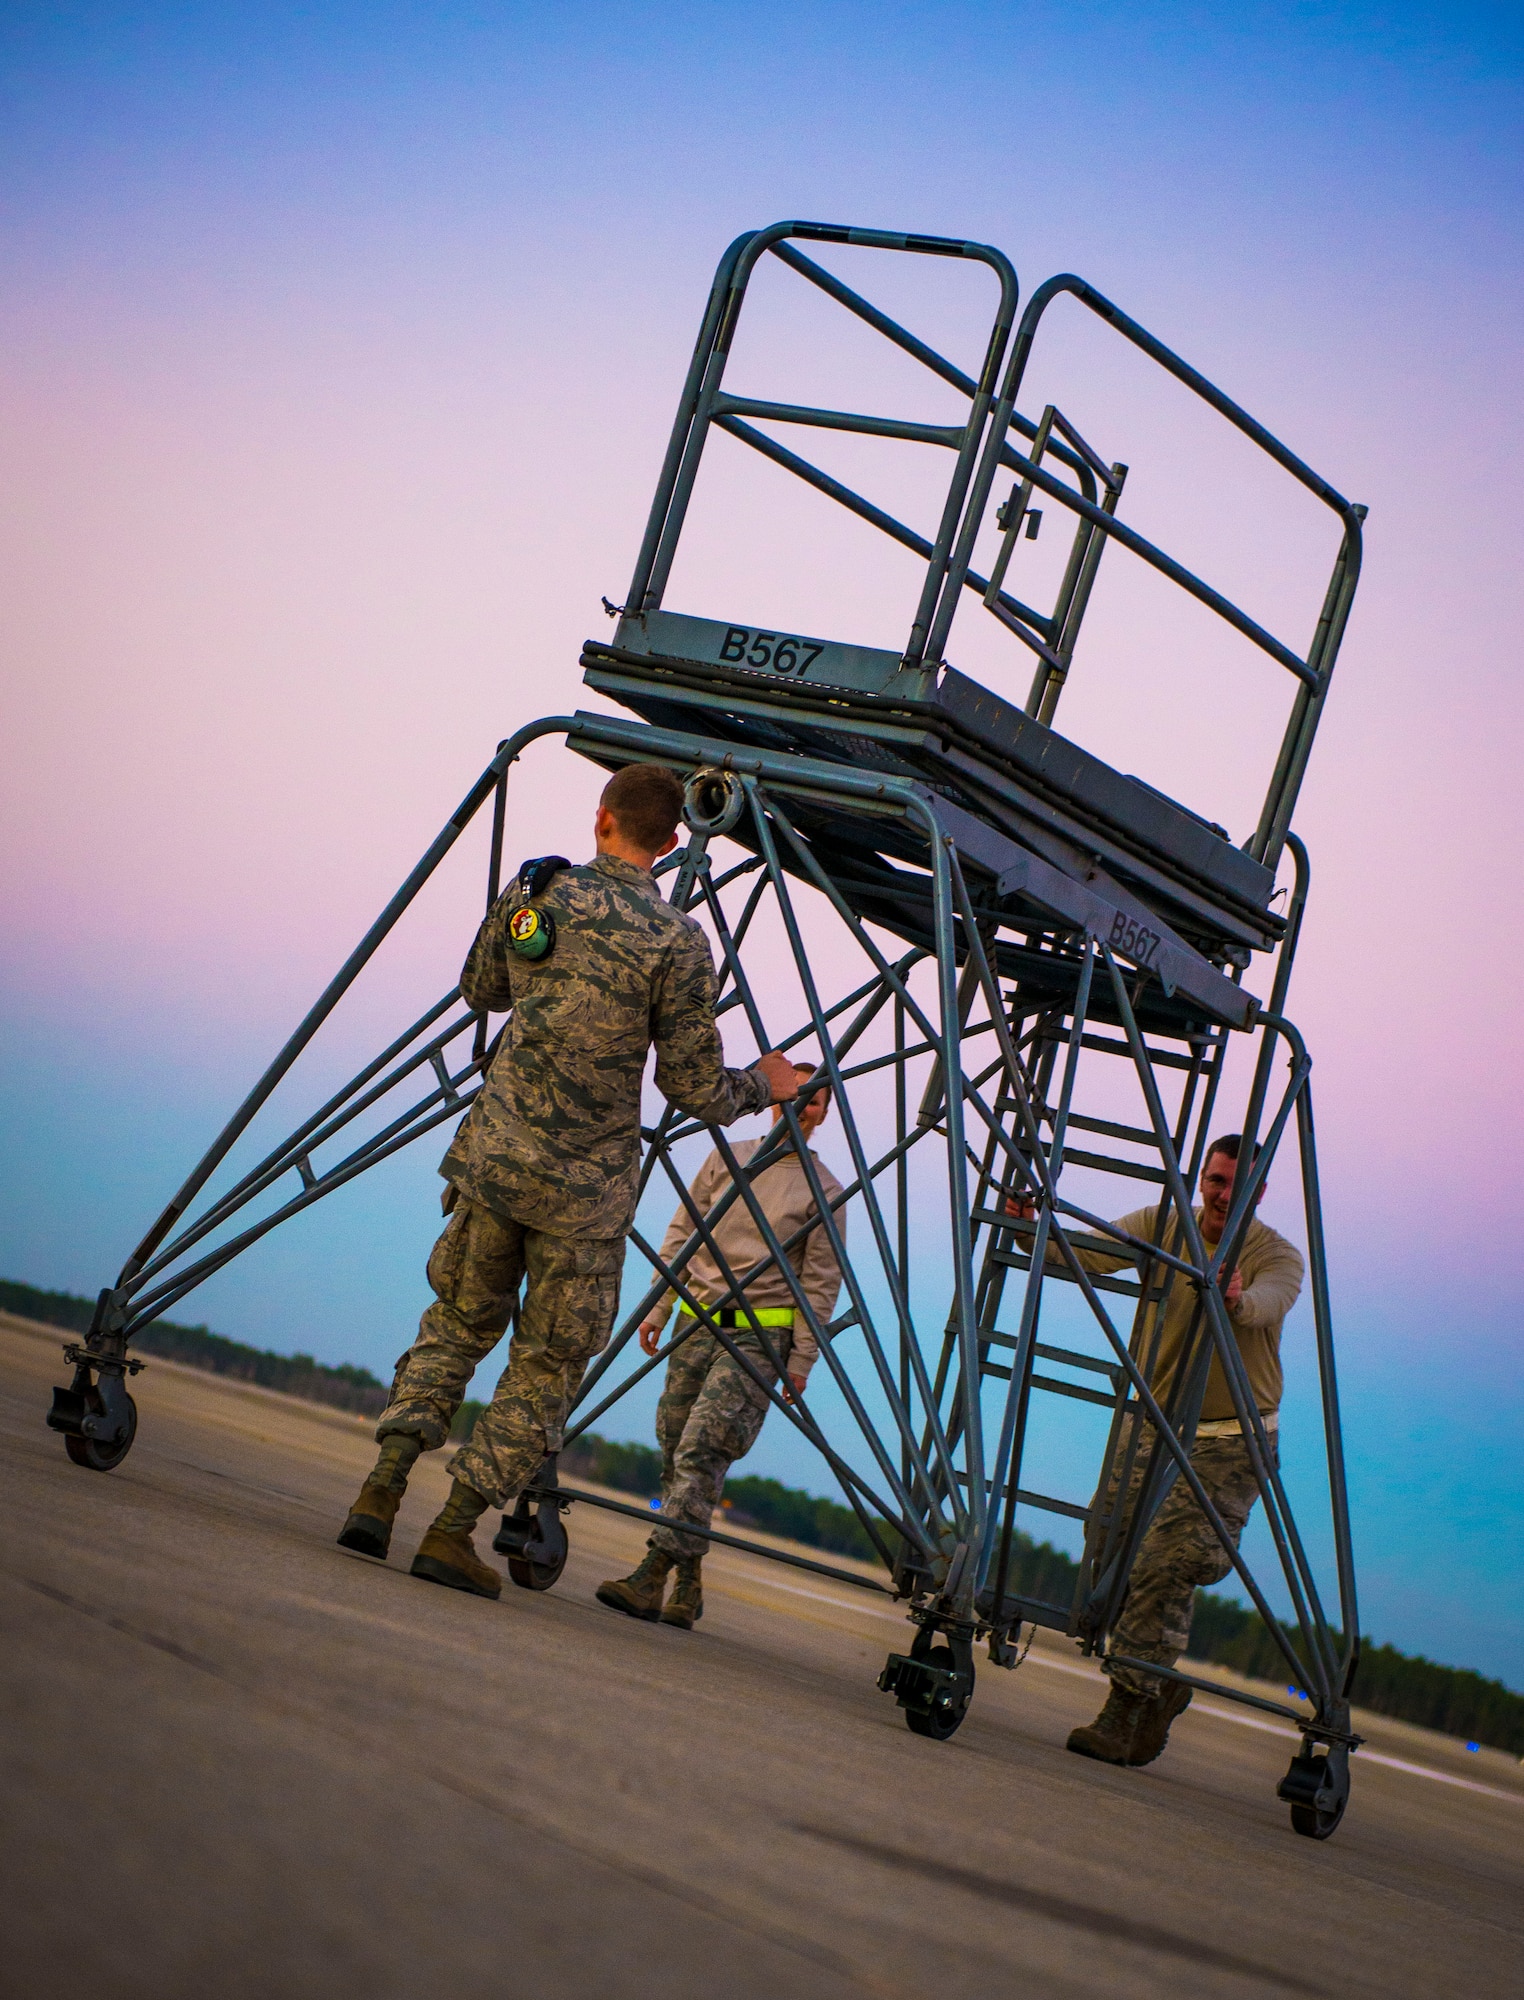 Airmen from the 15th Aircraft Maintenance Unit move a maintenance stand to work on a MC-130 Talon II at Hurlburt Field, Fla., Dec. 8, 2014. The mission of the aircraft involves a global, day and night, adverse weather capability to insert, extract and supply special operations by low or high altitude airdrop or land operations. (U.S. Air Force photo/Senior Airman Meagan K. Schutter)